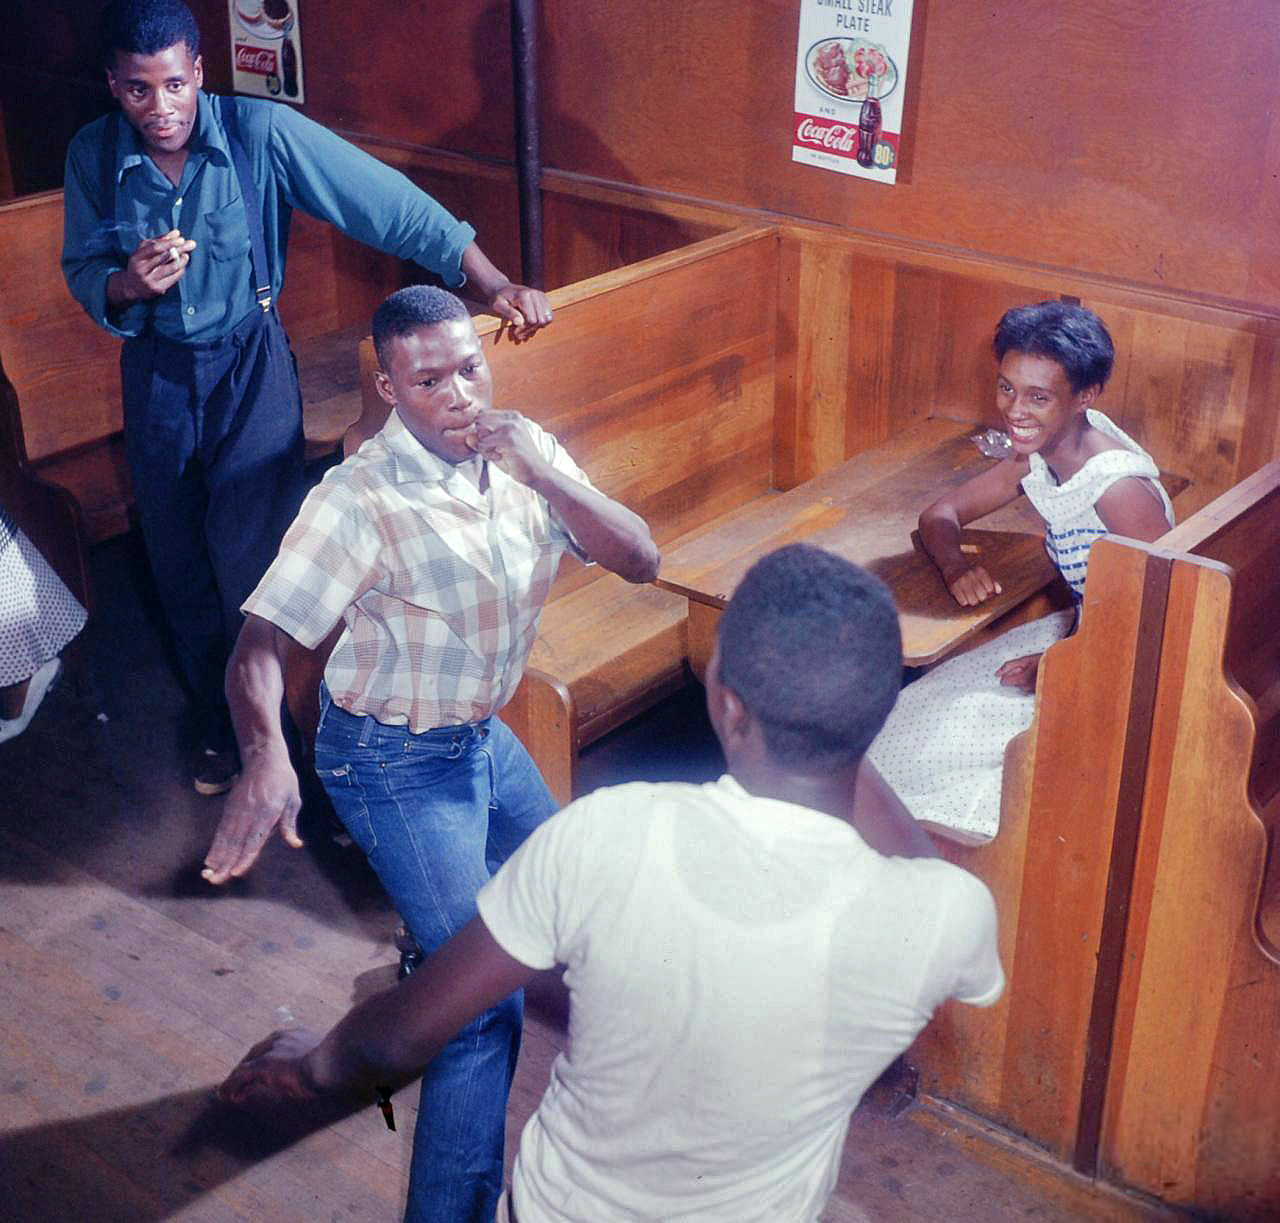 More from the South Carolina roadhouse. So far I've found five pictures of these two mixing it up, either wrestling or dancing. The captions don't say anything about what's going on, but the girl seems delighted. Color transparency by Margaret Bourke-White, Life magazine image archive. View full size.